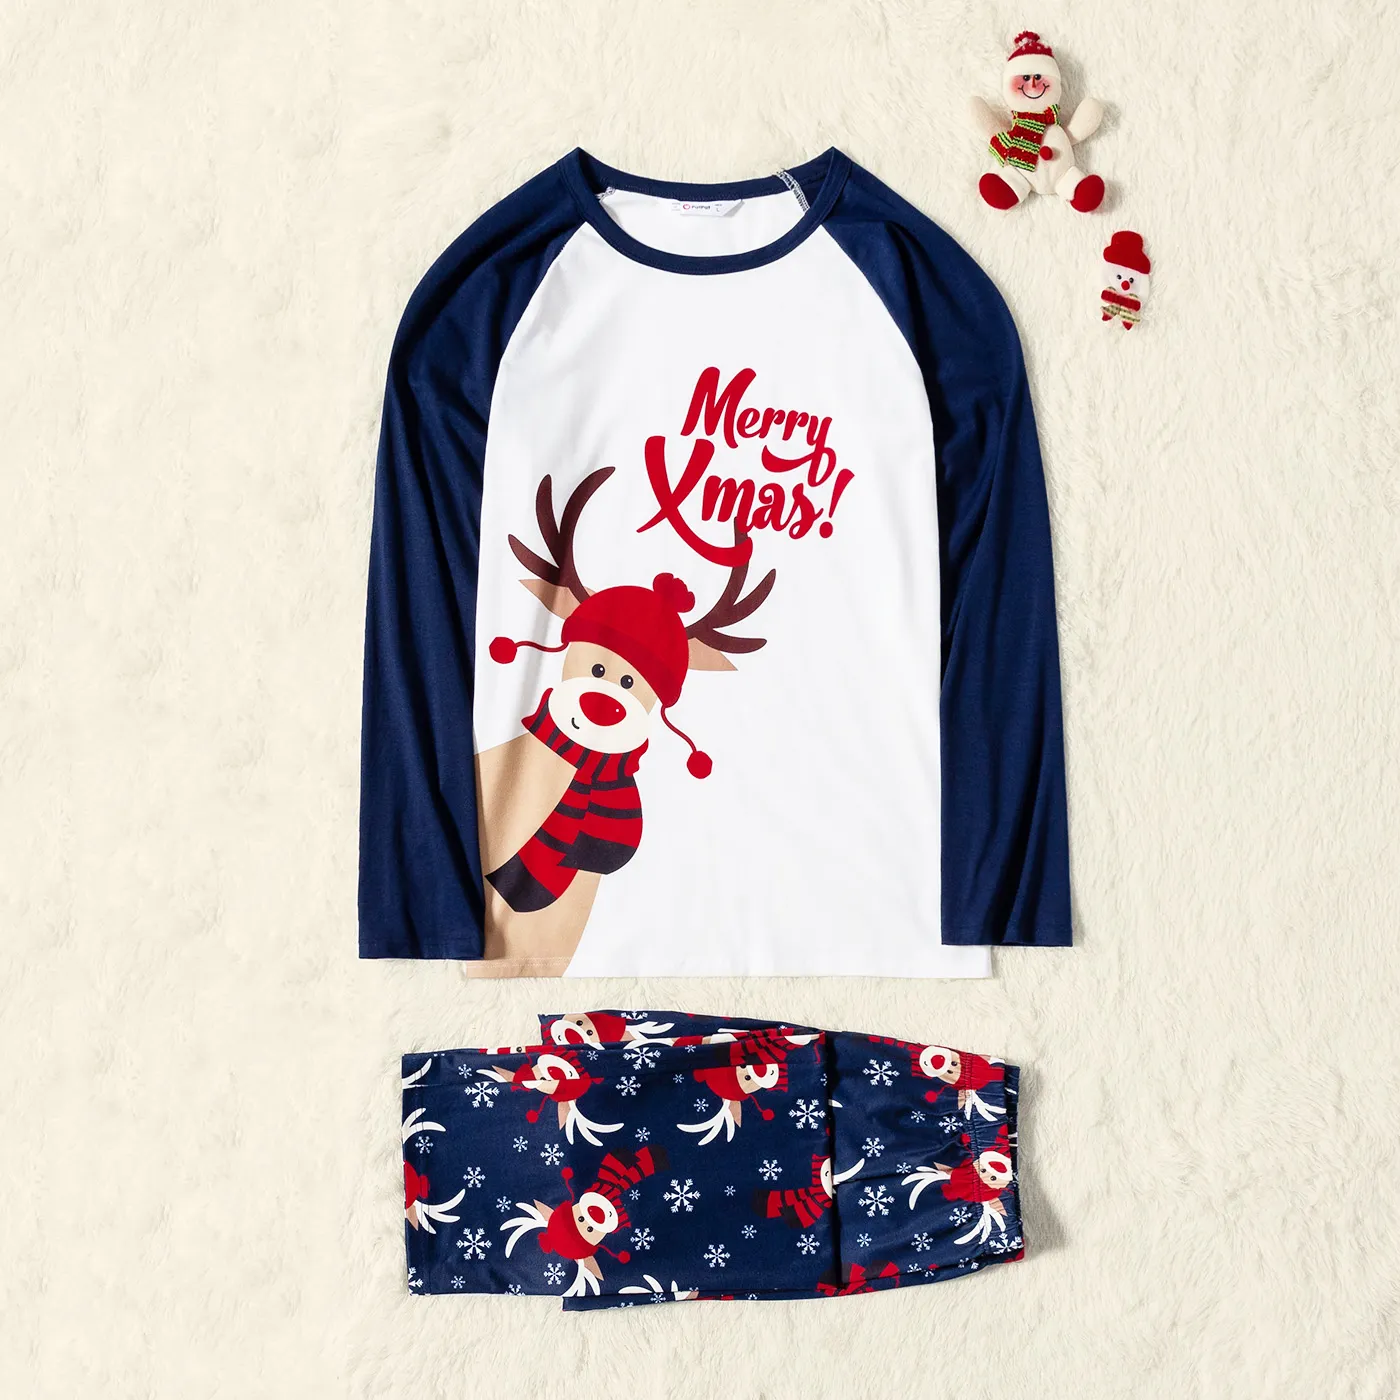 Merry Xmas Letters and Reindeer Print Navy Family Matching Long-sleeve Pajamas Sets (Flame Resistant